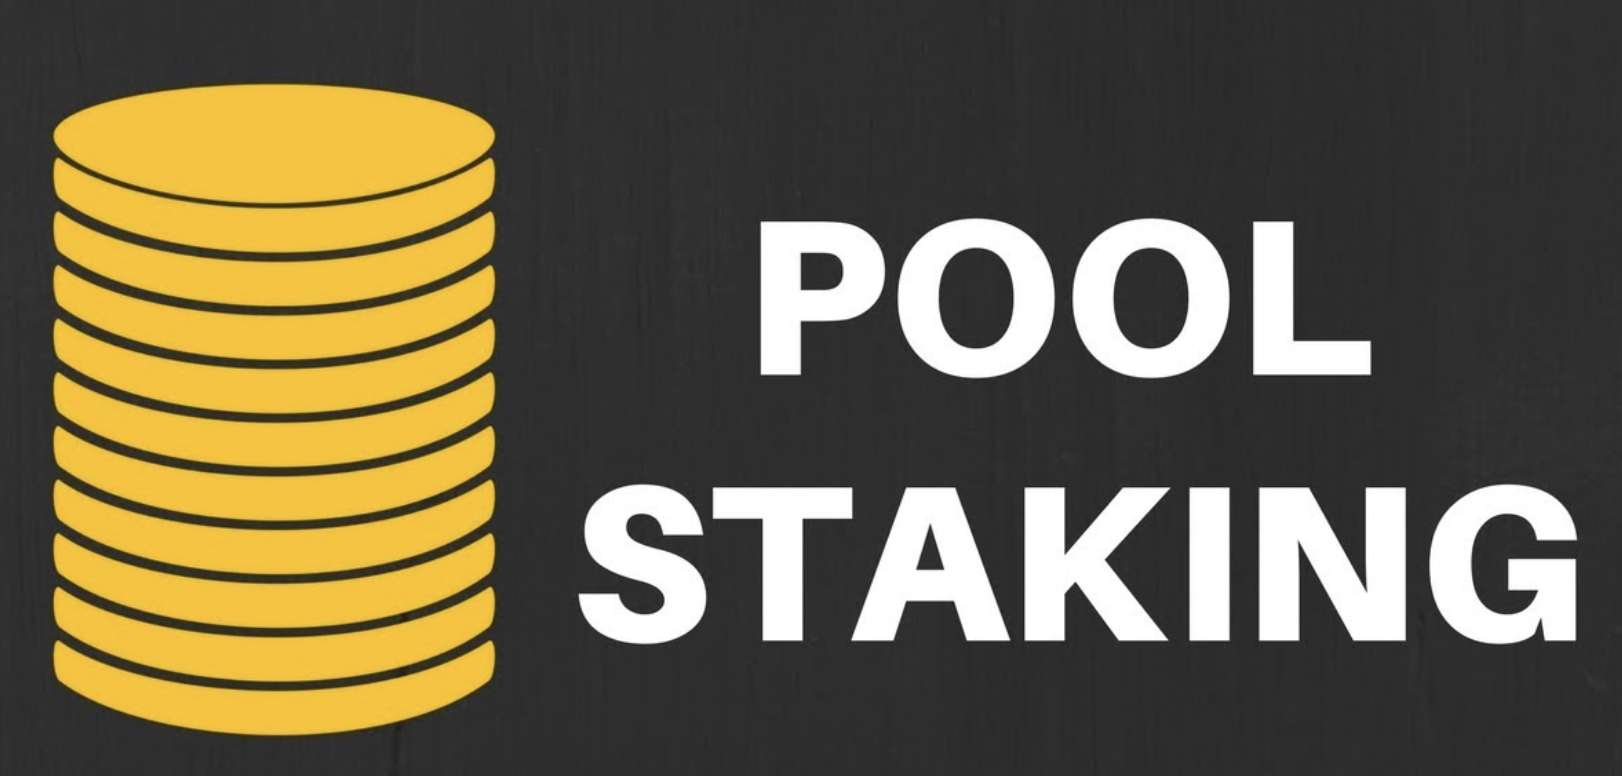 China’s PoS Players: Staking Does Not Make Money Right Now